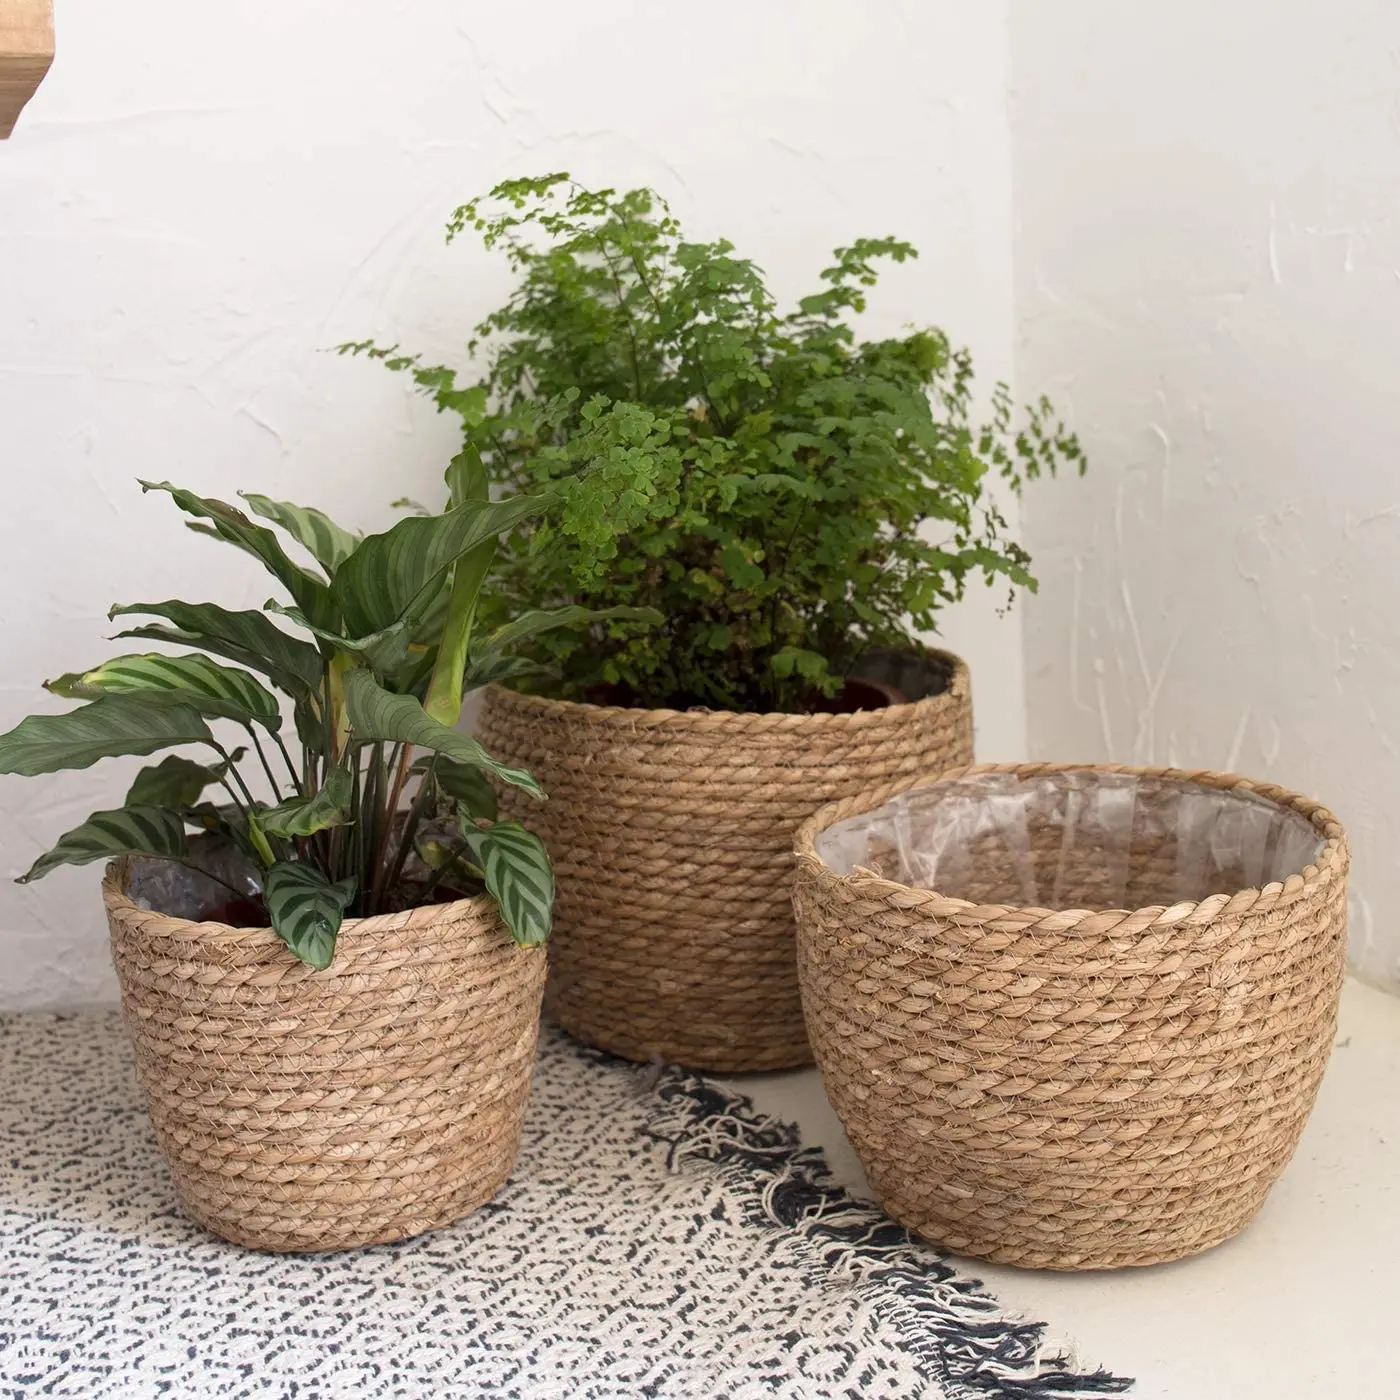 3 Handmade Seagrass Planter Basket Indoor Outdoor Flower Pots,Plant Containers